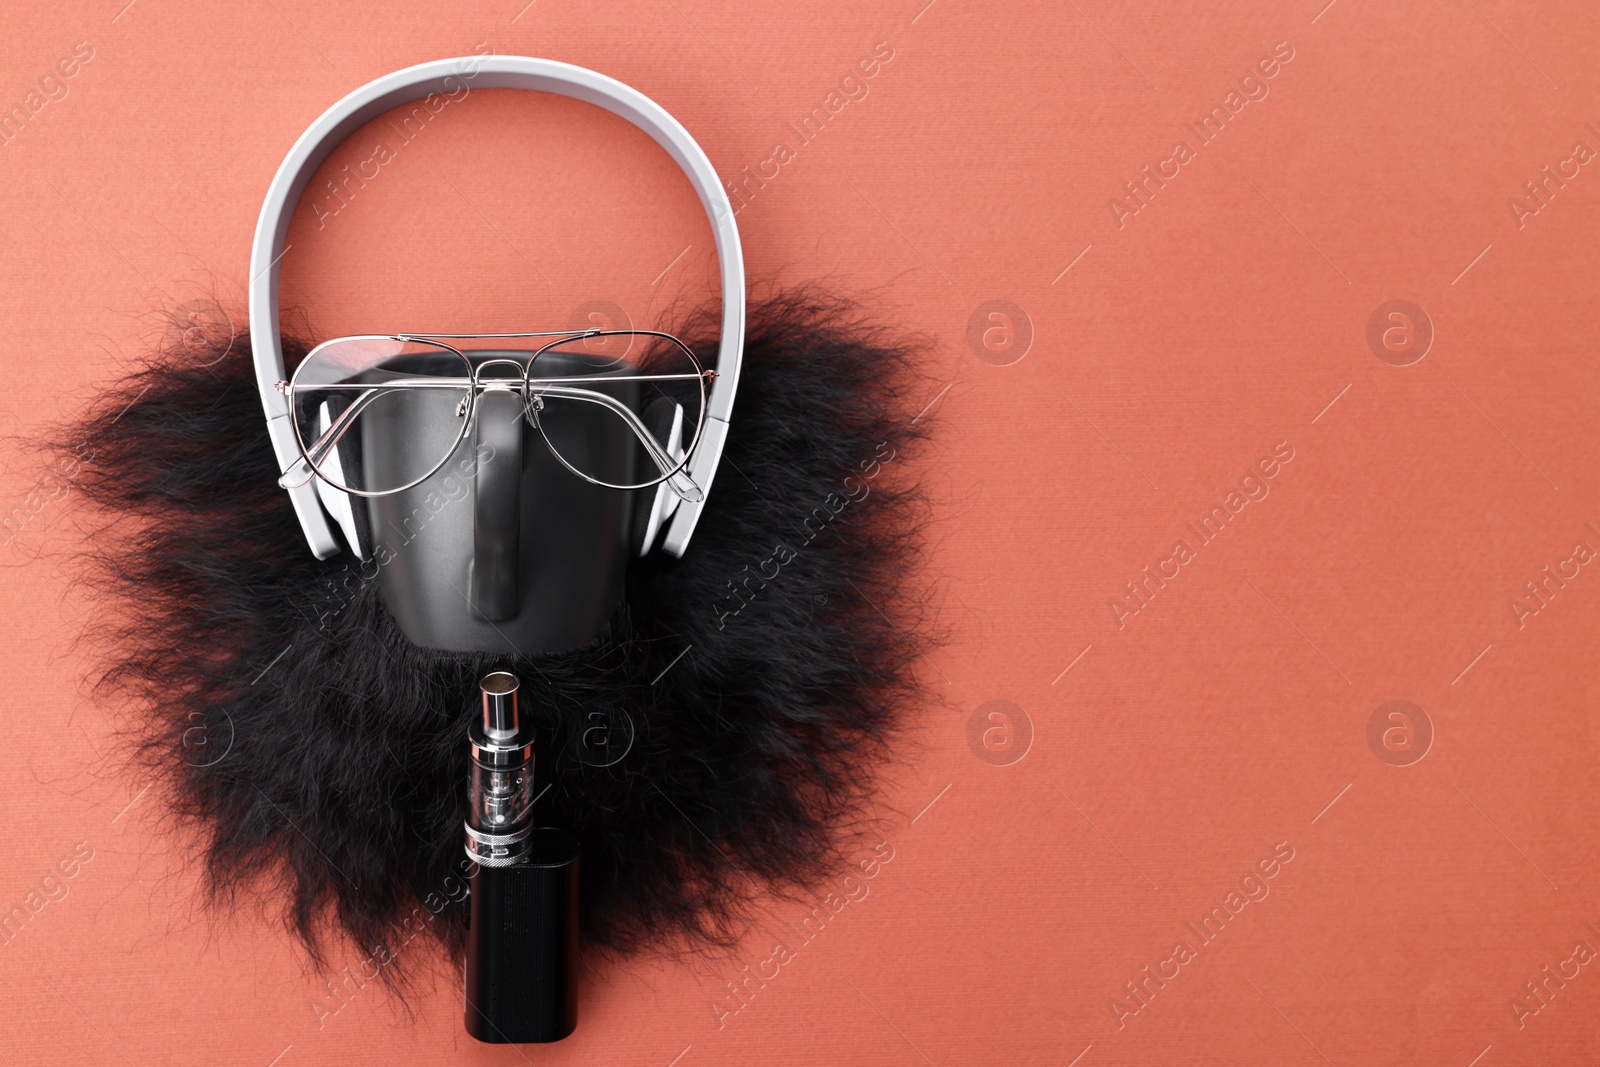 Photo of Man's face made of artificial beard, headphones and glasses on terracotta background, top view. Space for text